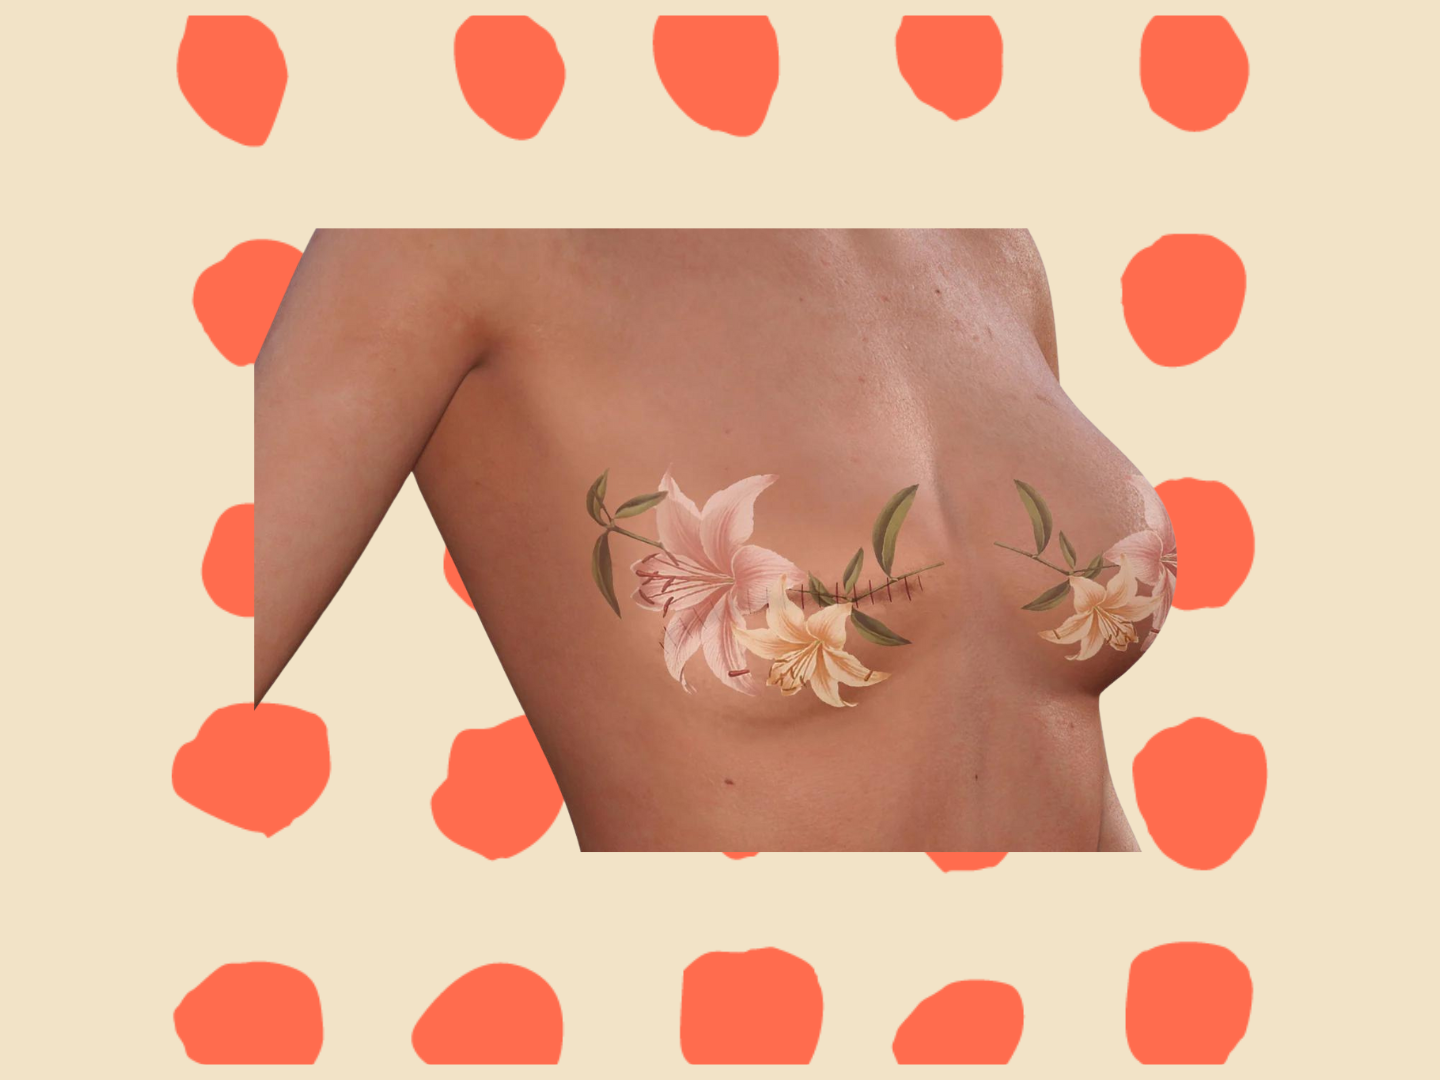 A chest with mastectomy scars covered by temporary tattoos of lilies.